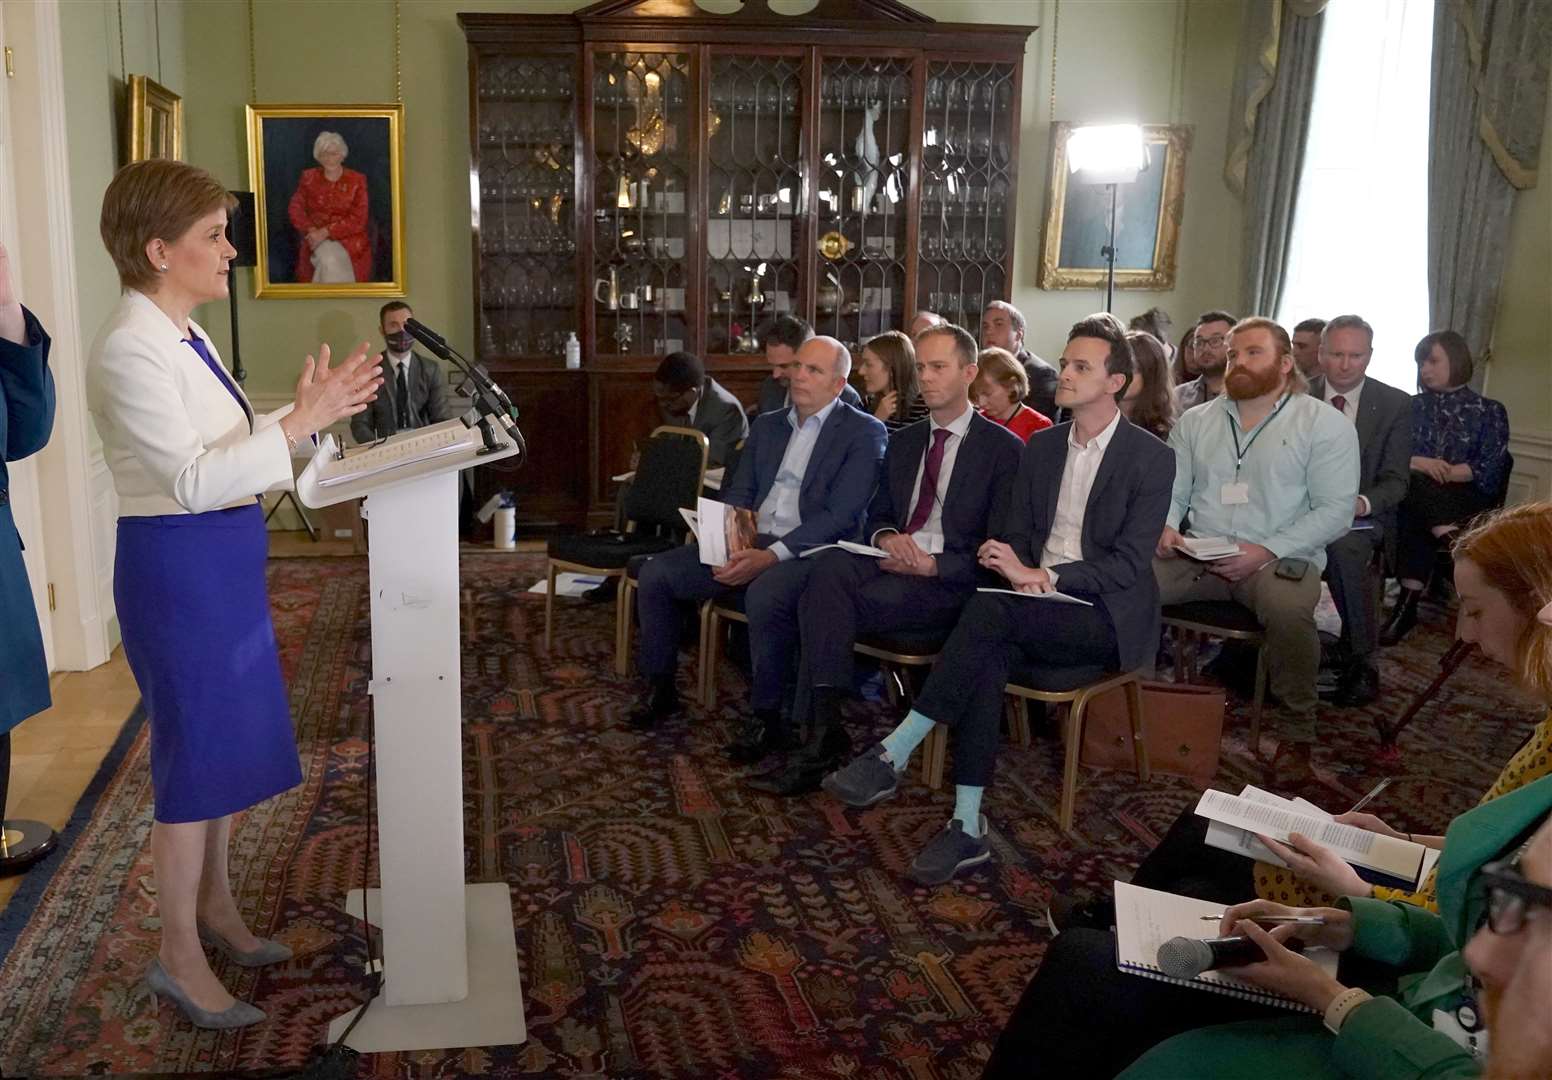 Nicola Sturgeon launches her second independence paper at Bute House (Andrew Milligan/PA)